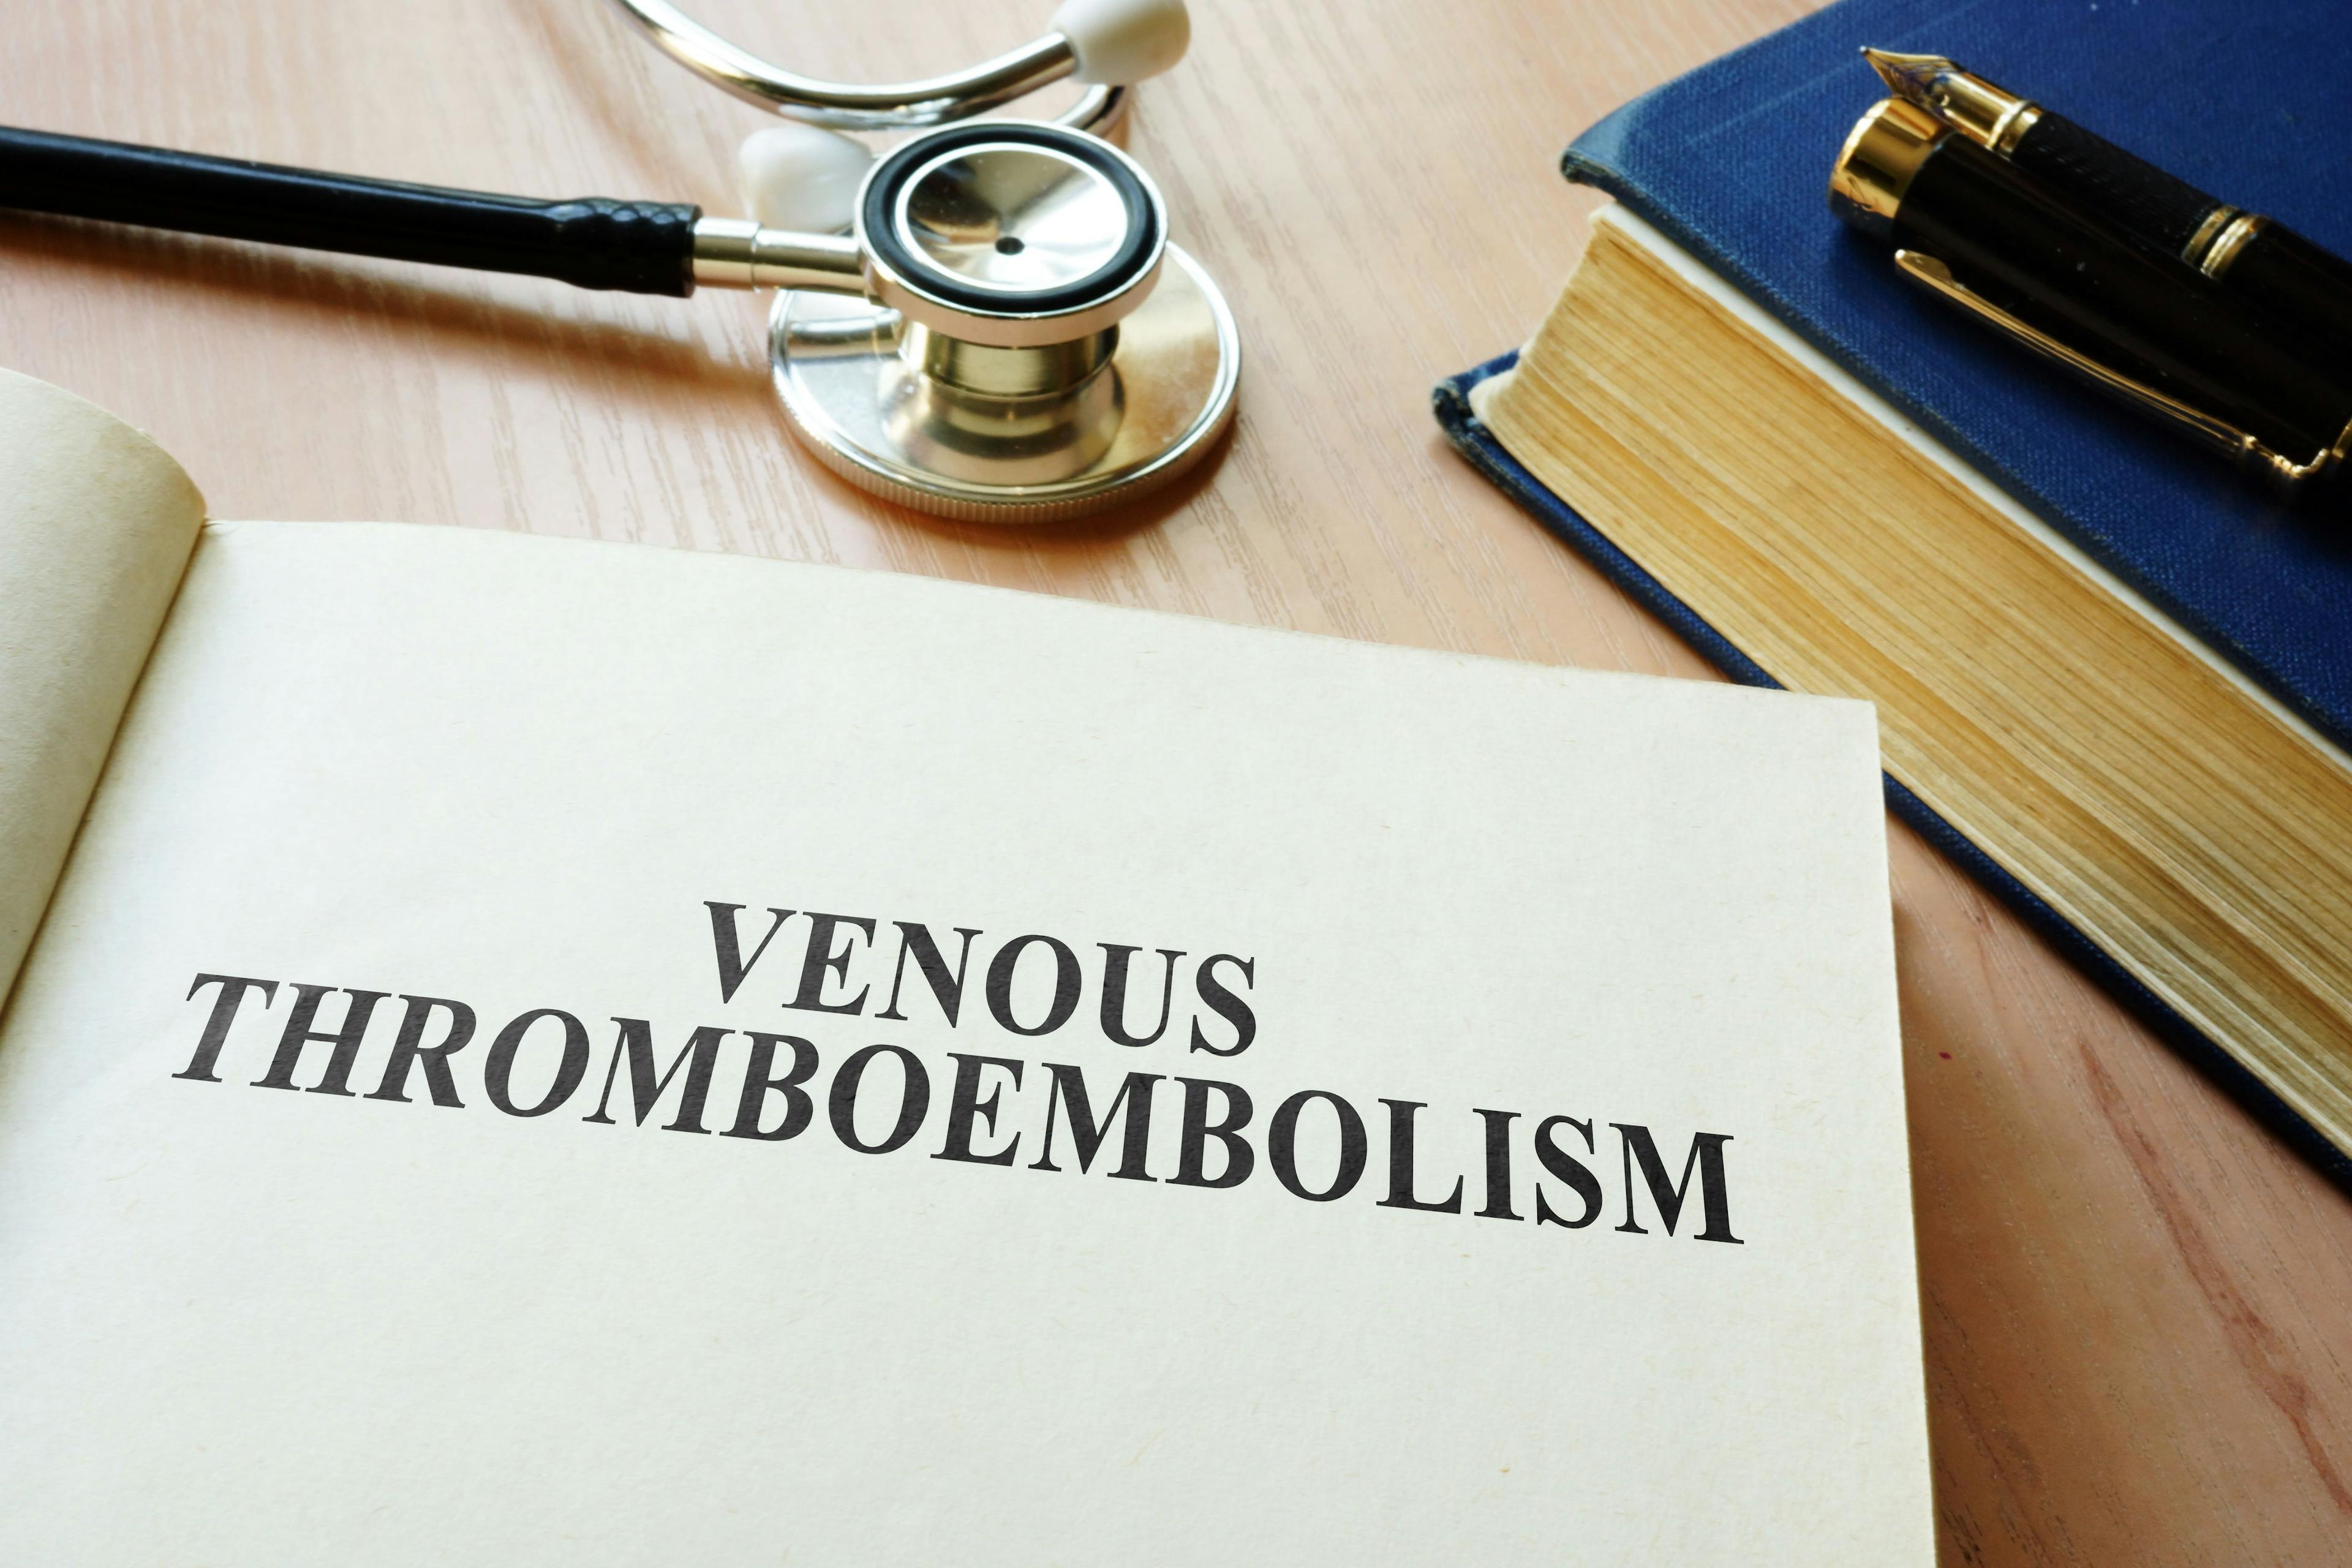 EULAR Report: High Disease Activity in RA Linked to Venous Thromboembolism